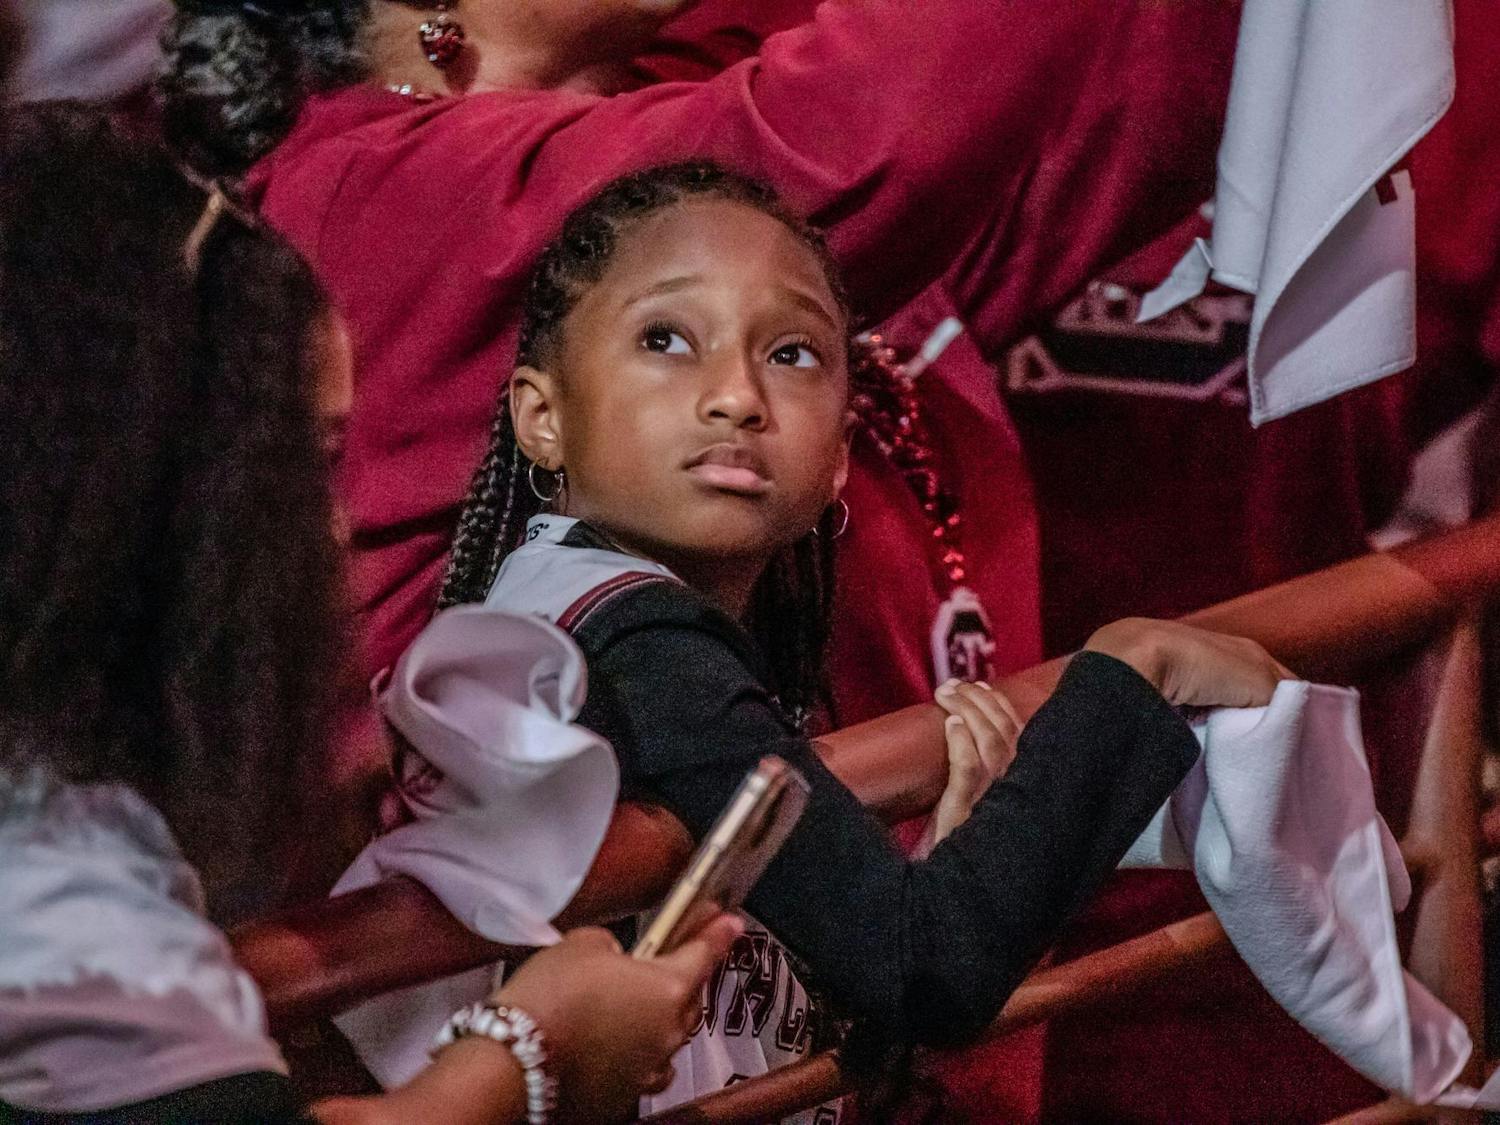 A young Gamecock fan looks toward the video board prior to the start of a welcome home celebration for the 2024 National Champion South Carolina Women's Basketball team at Colonial Life Arena on April 8, 2024. An estimated 18.7 million viewers tuned in to watch the Gamecocks' 87-75 victory over the Iowa Hawkeyes.